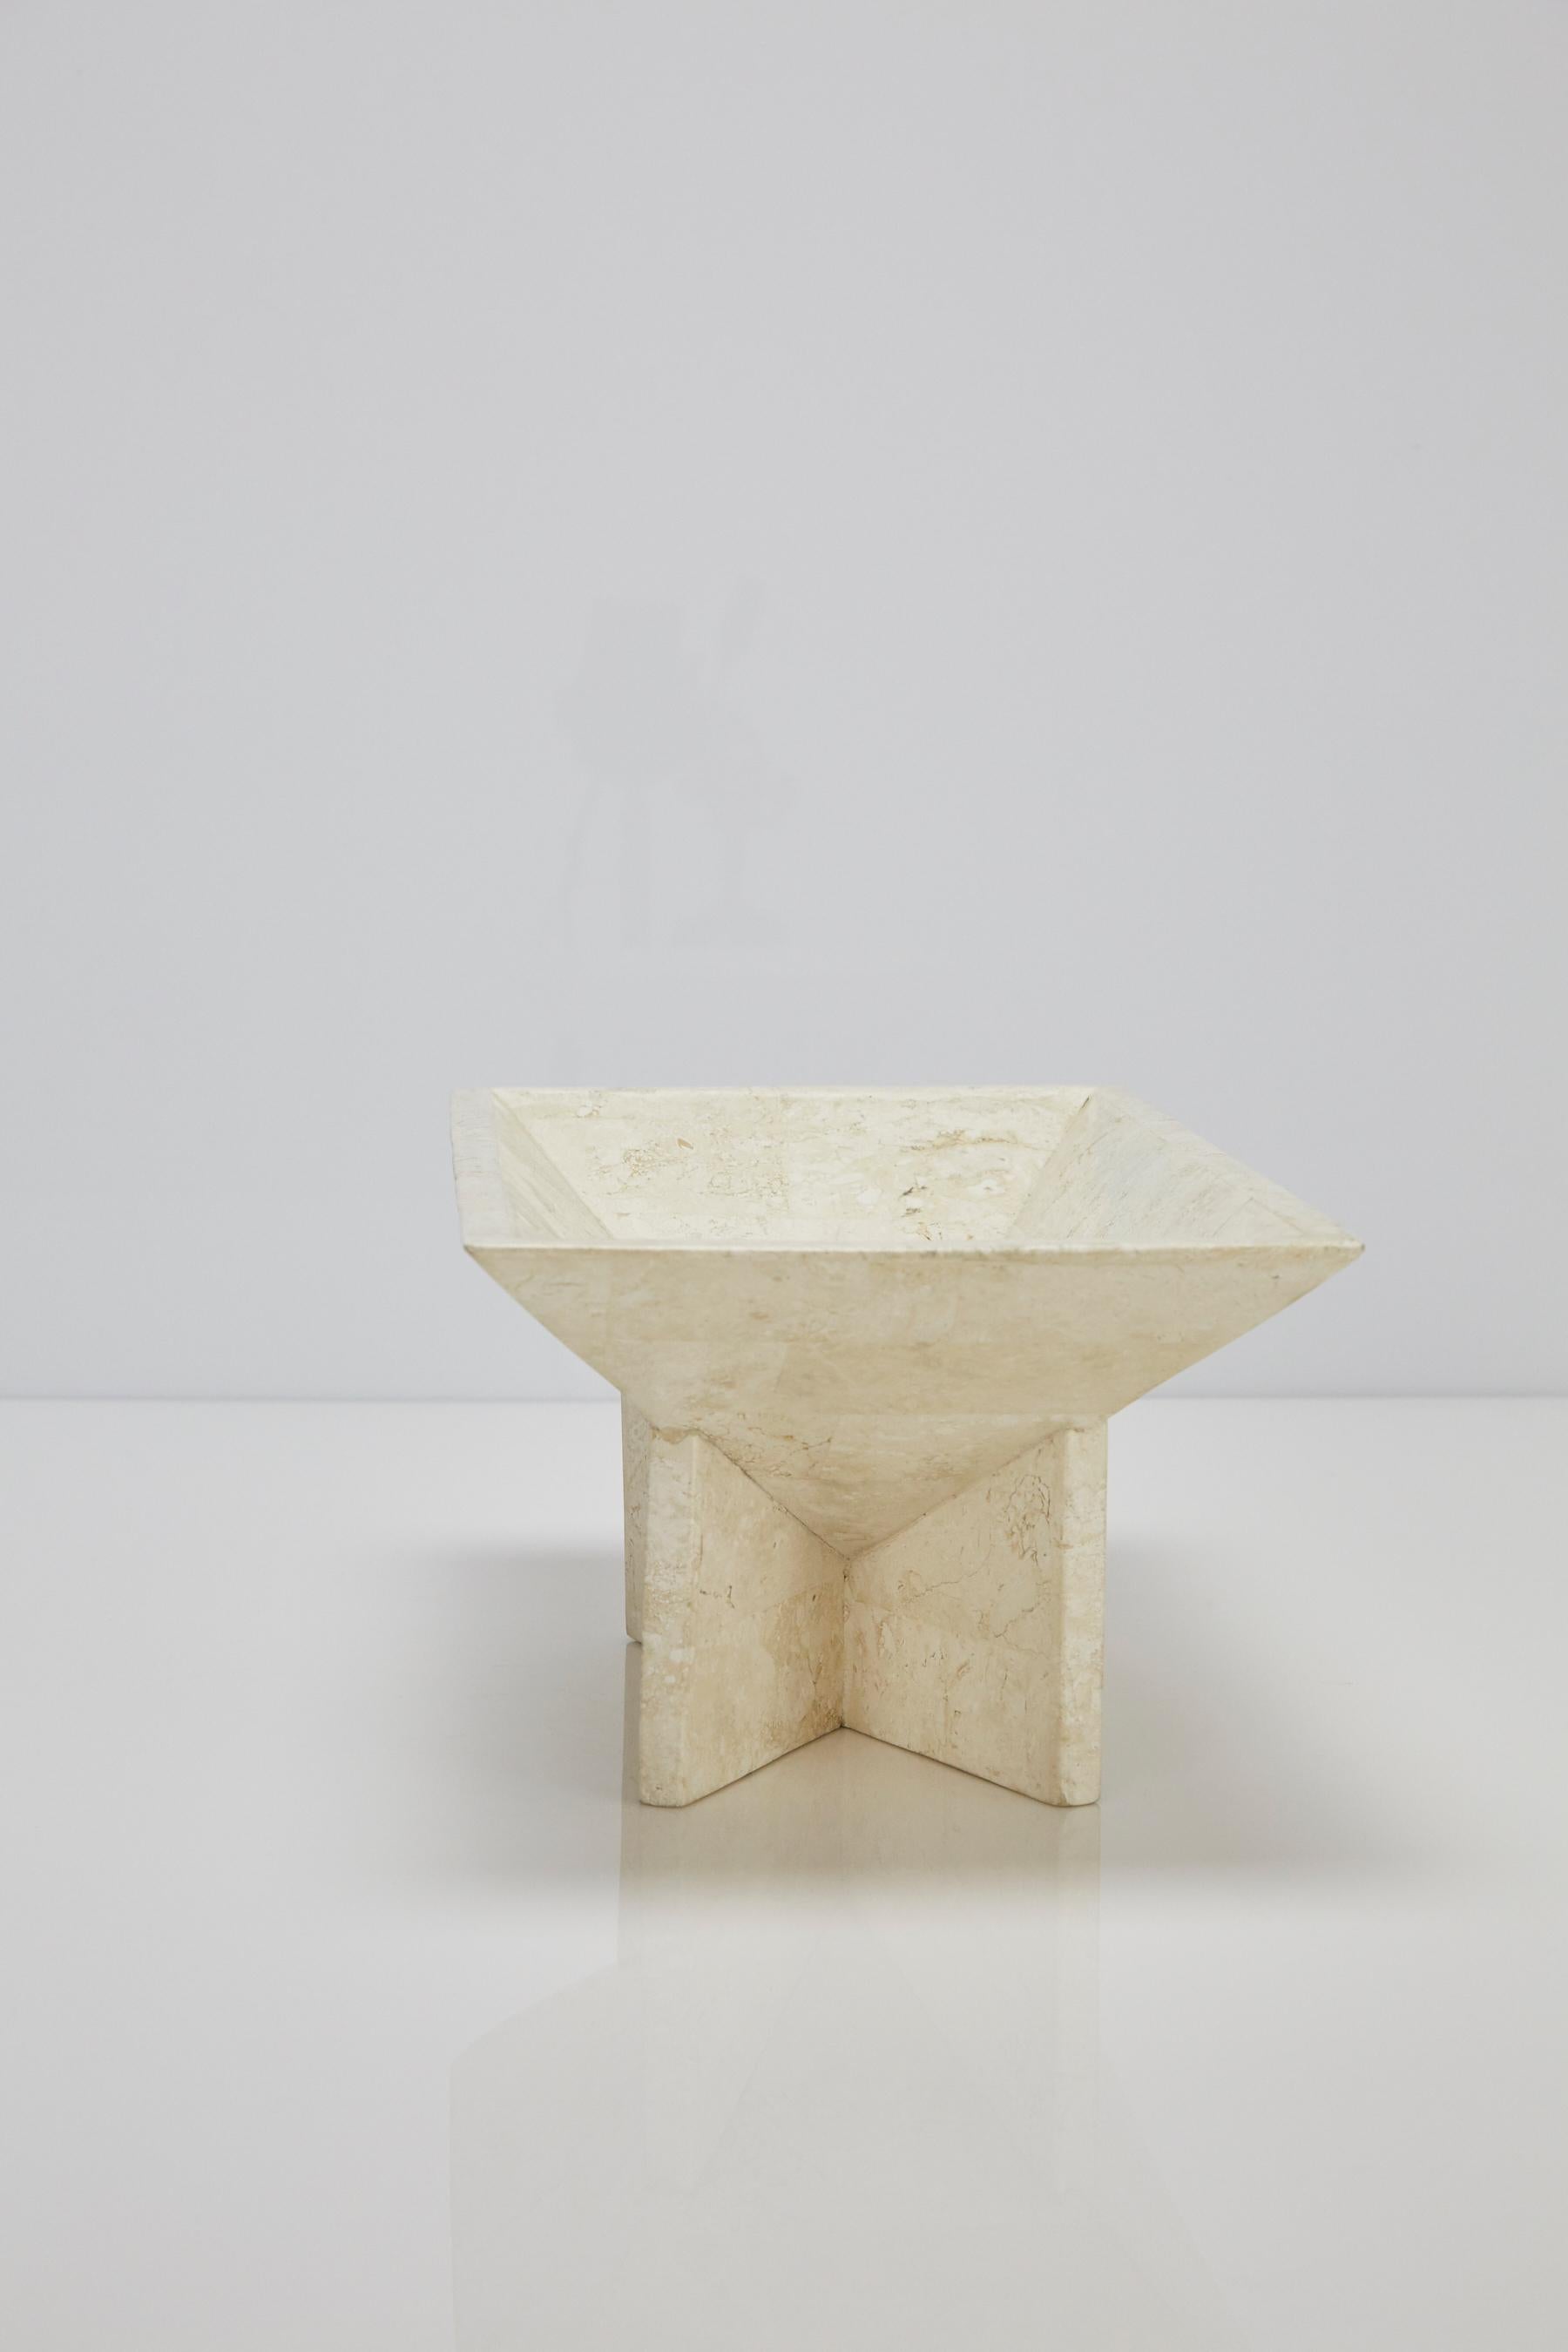 Philippine Rectangular Tessellated Stone Bowl on Elevated Base, 1990s For Sale